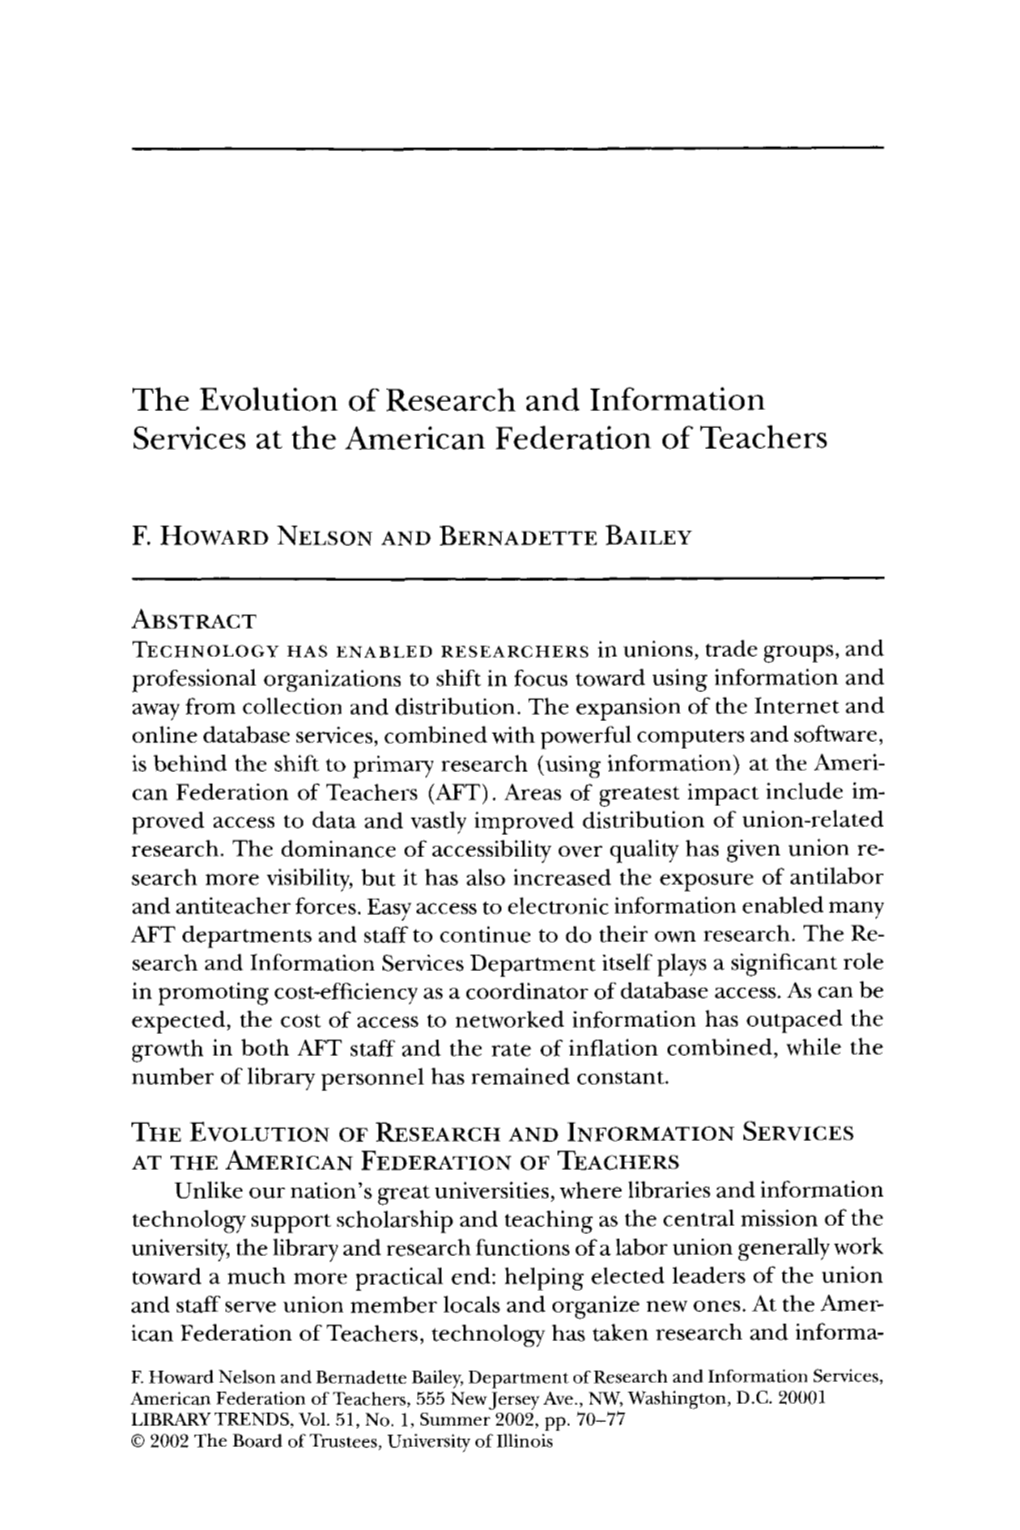 The Evolution of Research and Information Services at the American Federation of Teachers